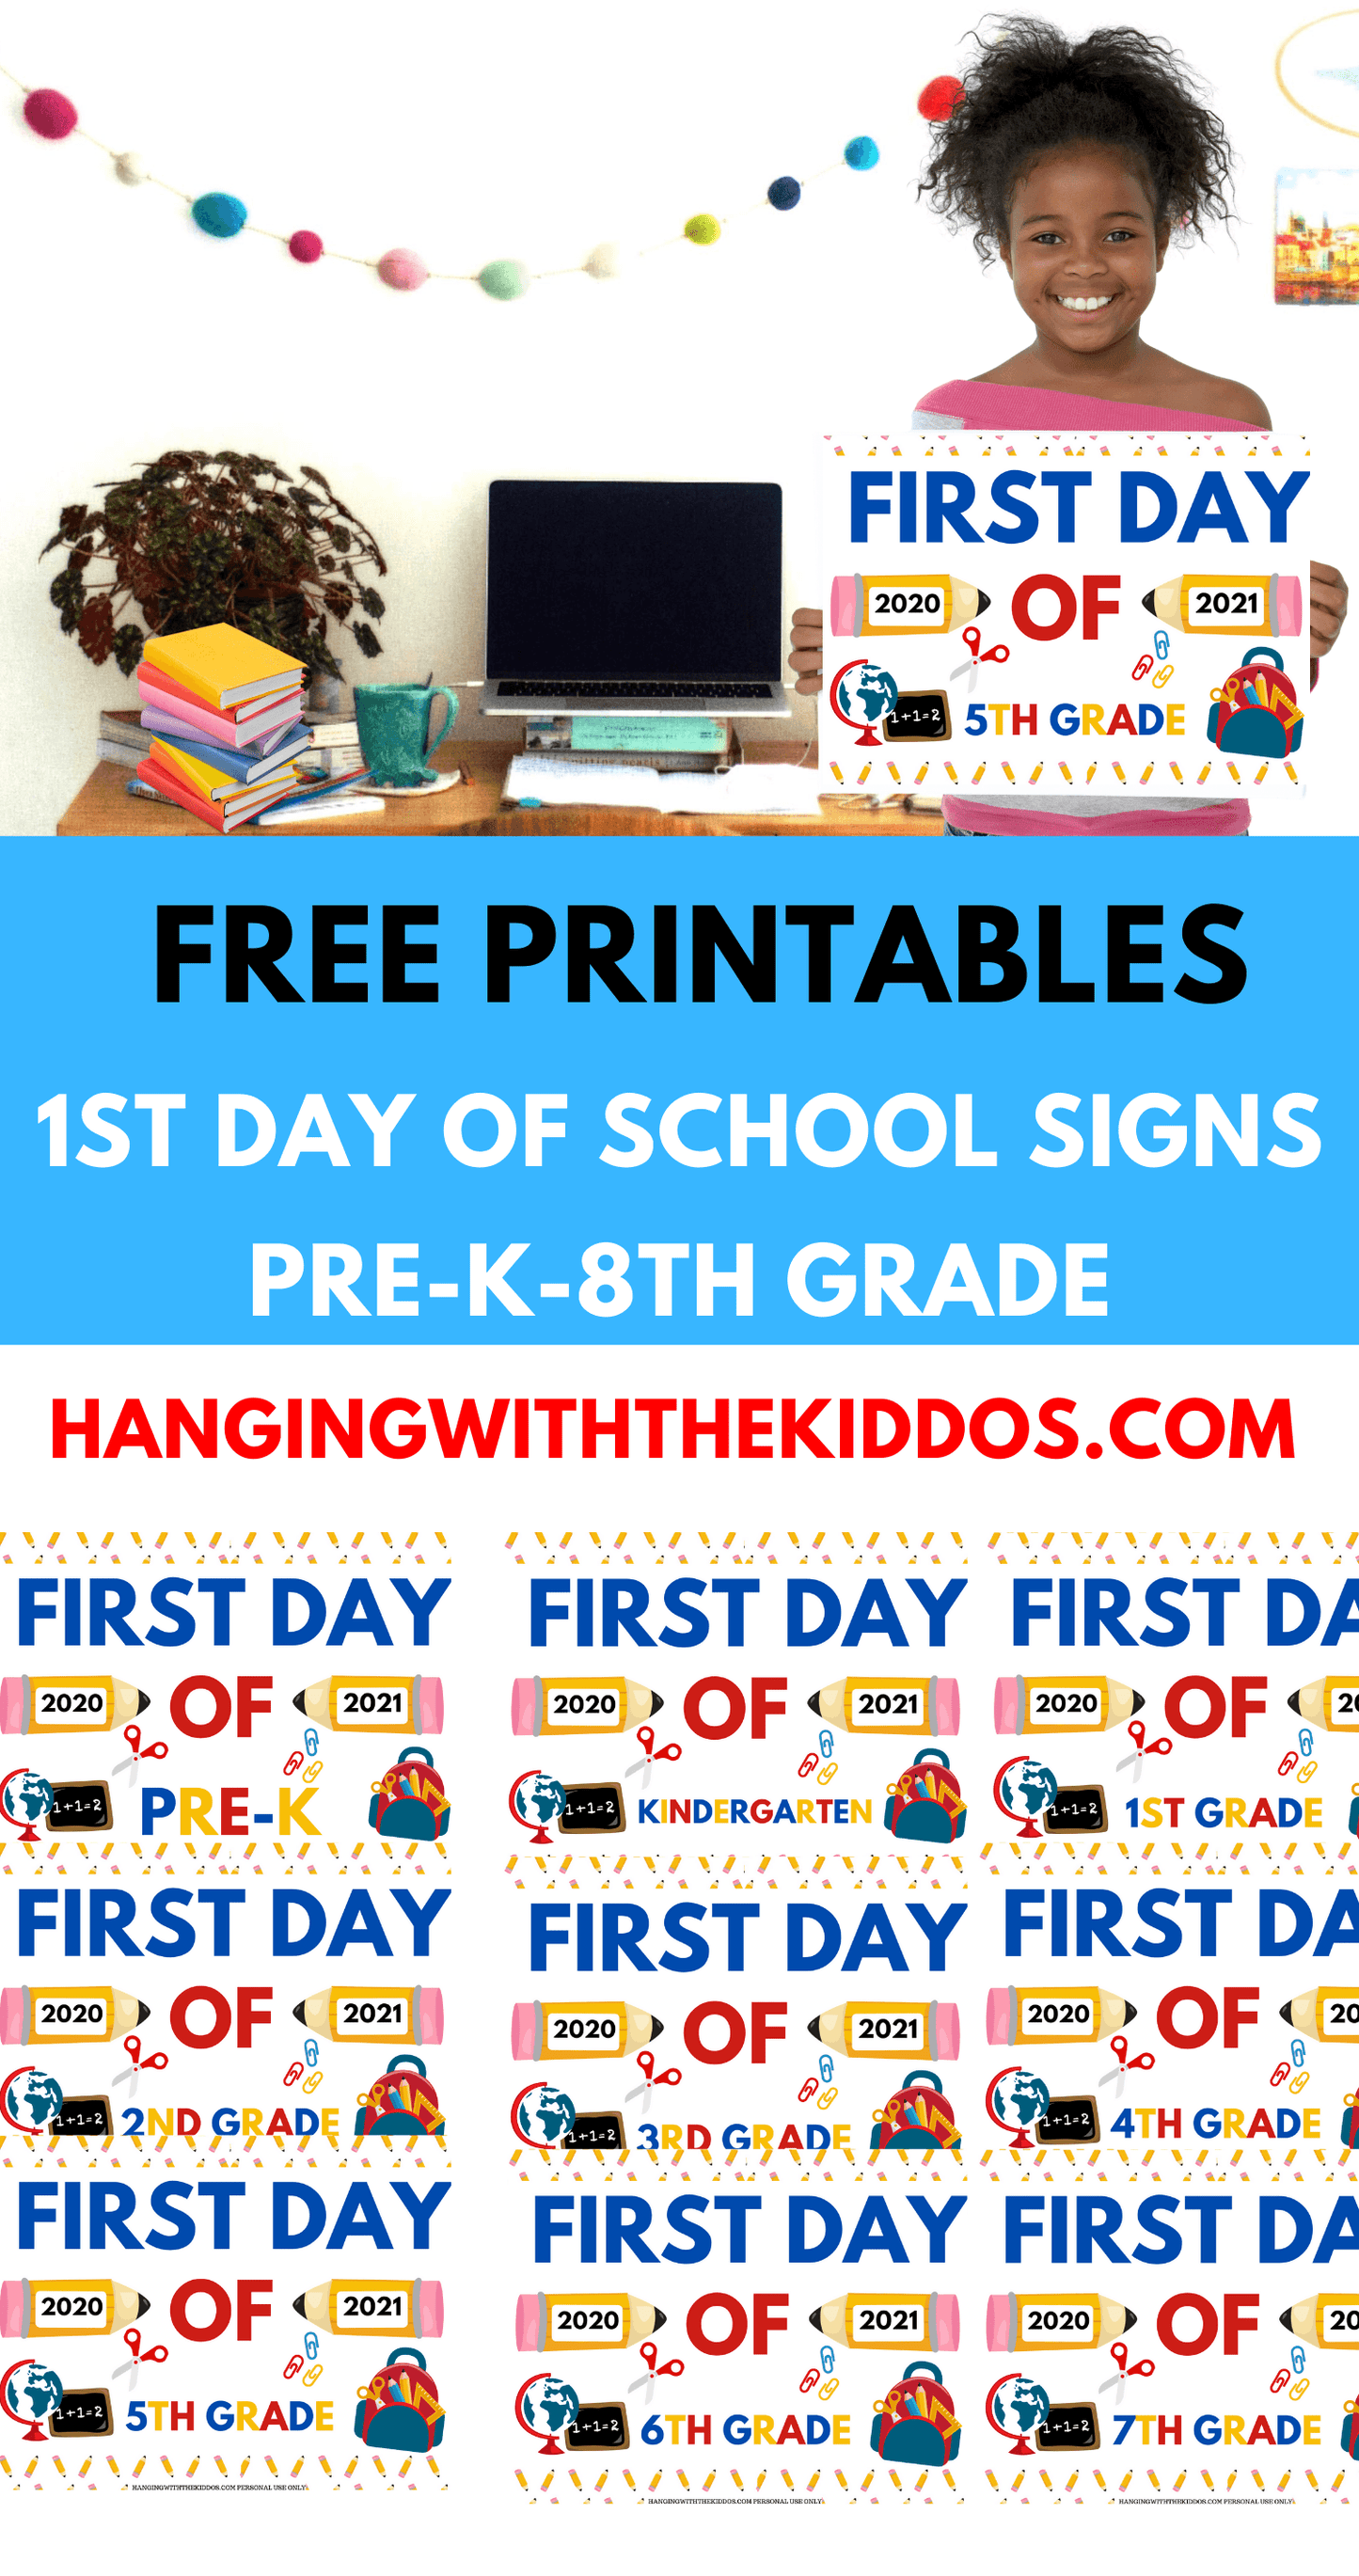 First Day of School Signs free printables